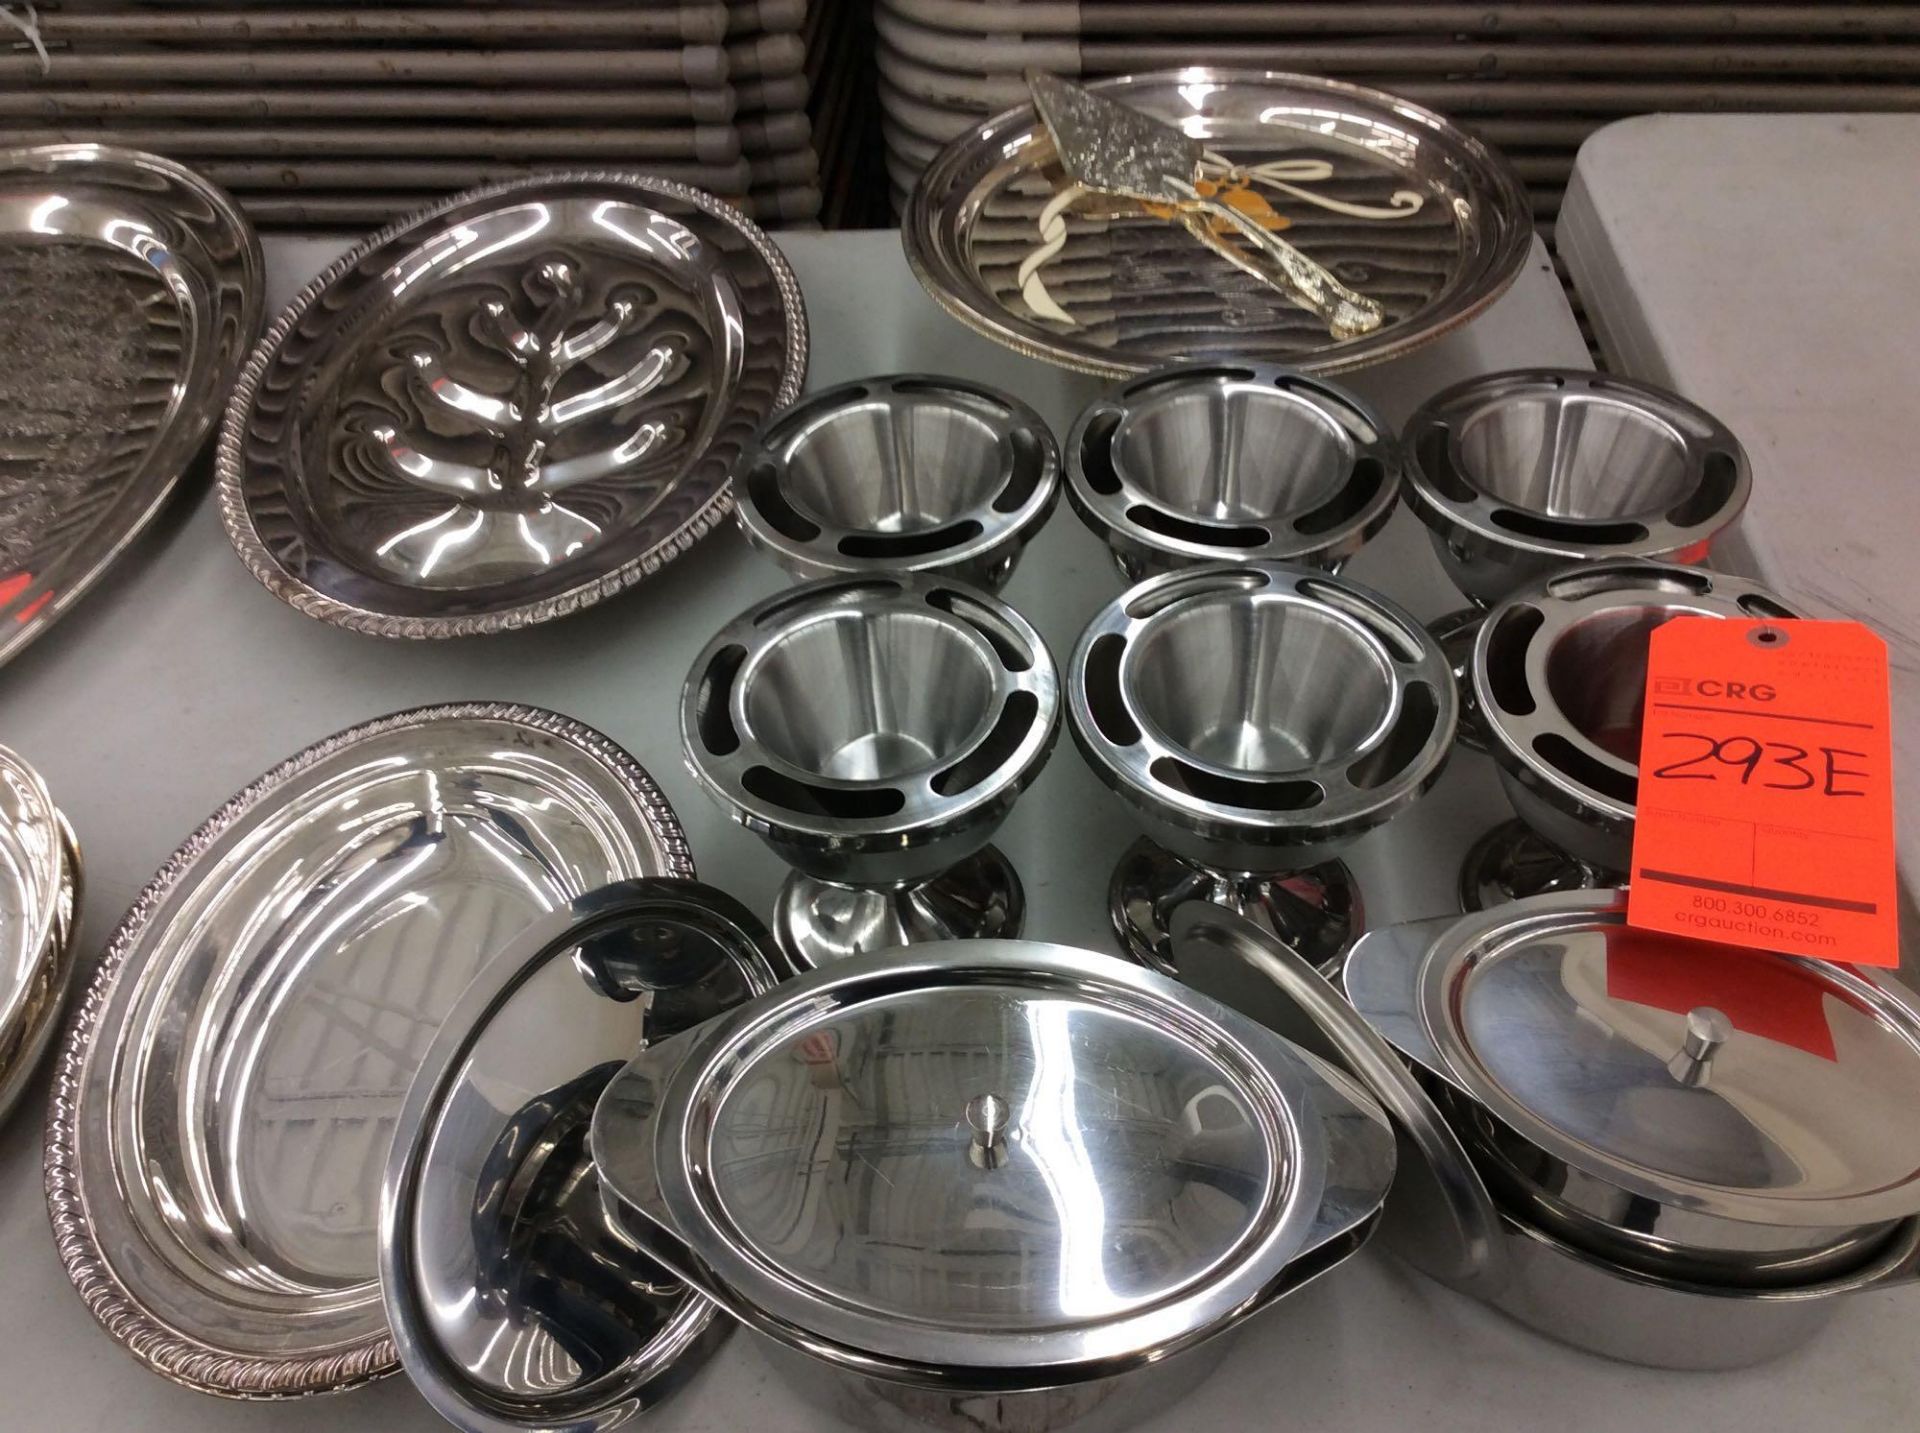 Lot of asst silver-plated and stainless serving trays, bowls, gravy boats, etc. - Image 3 of 3